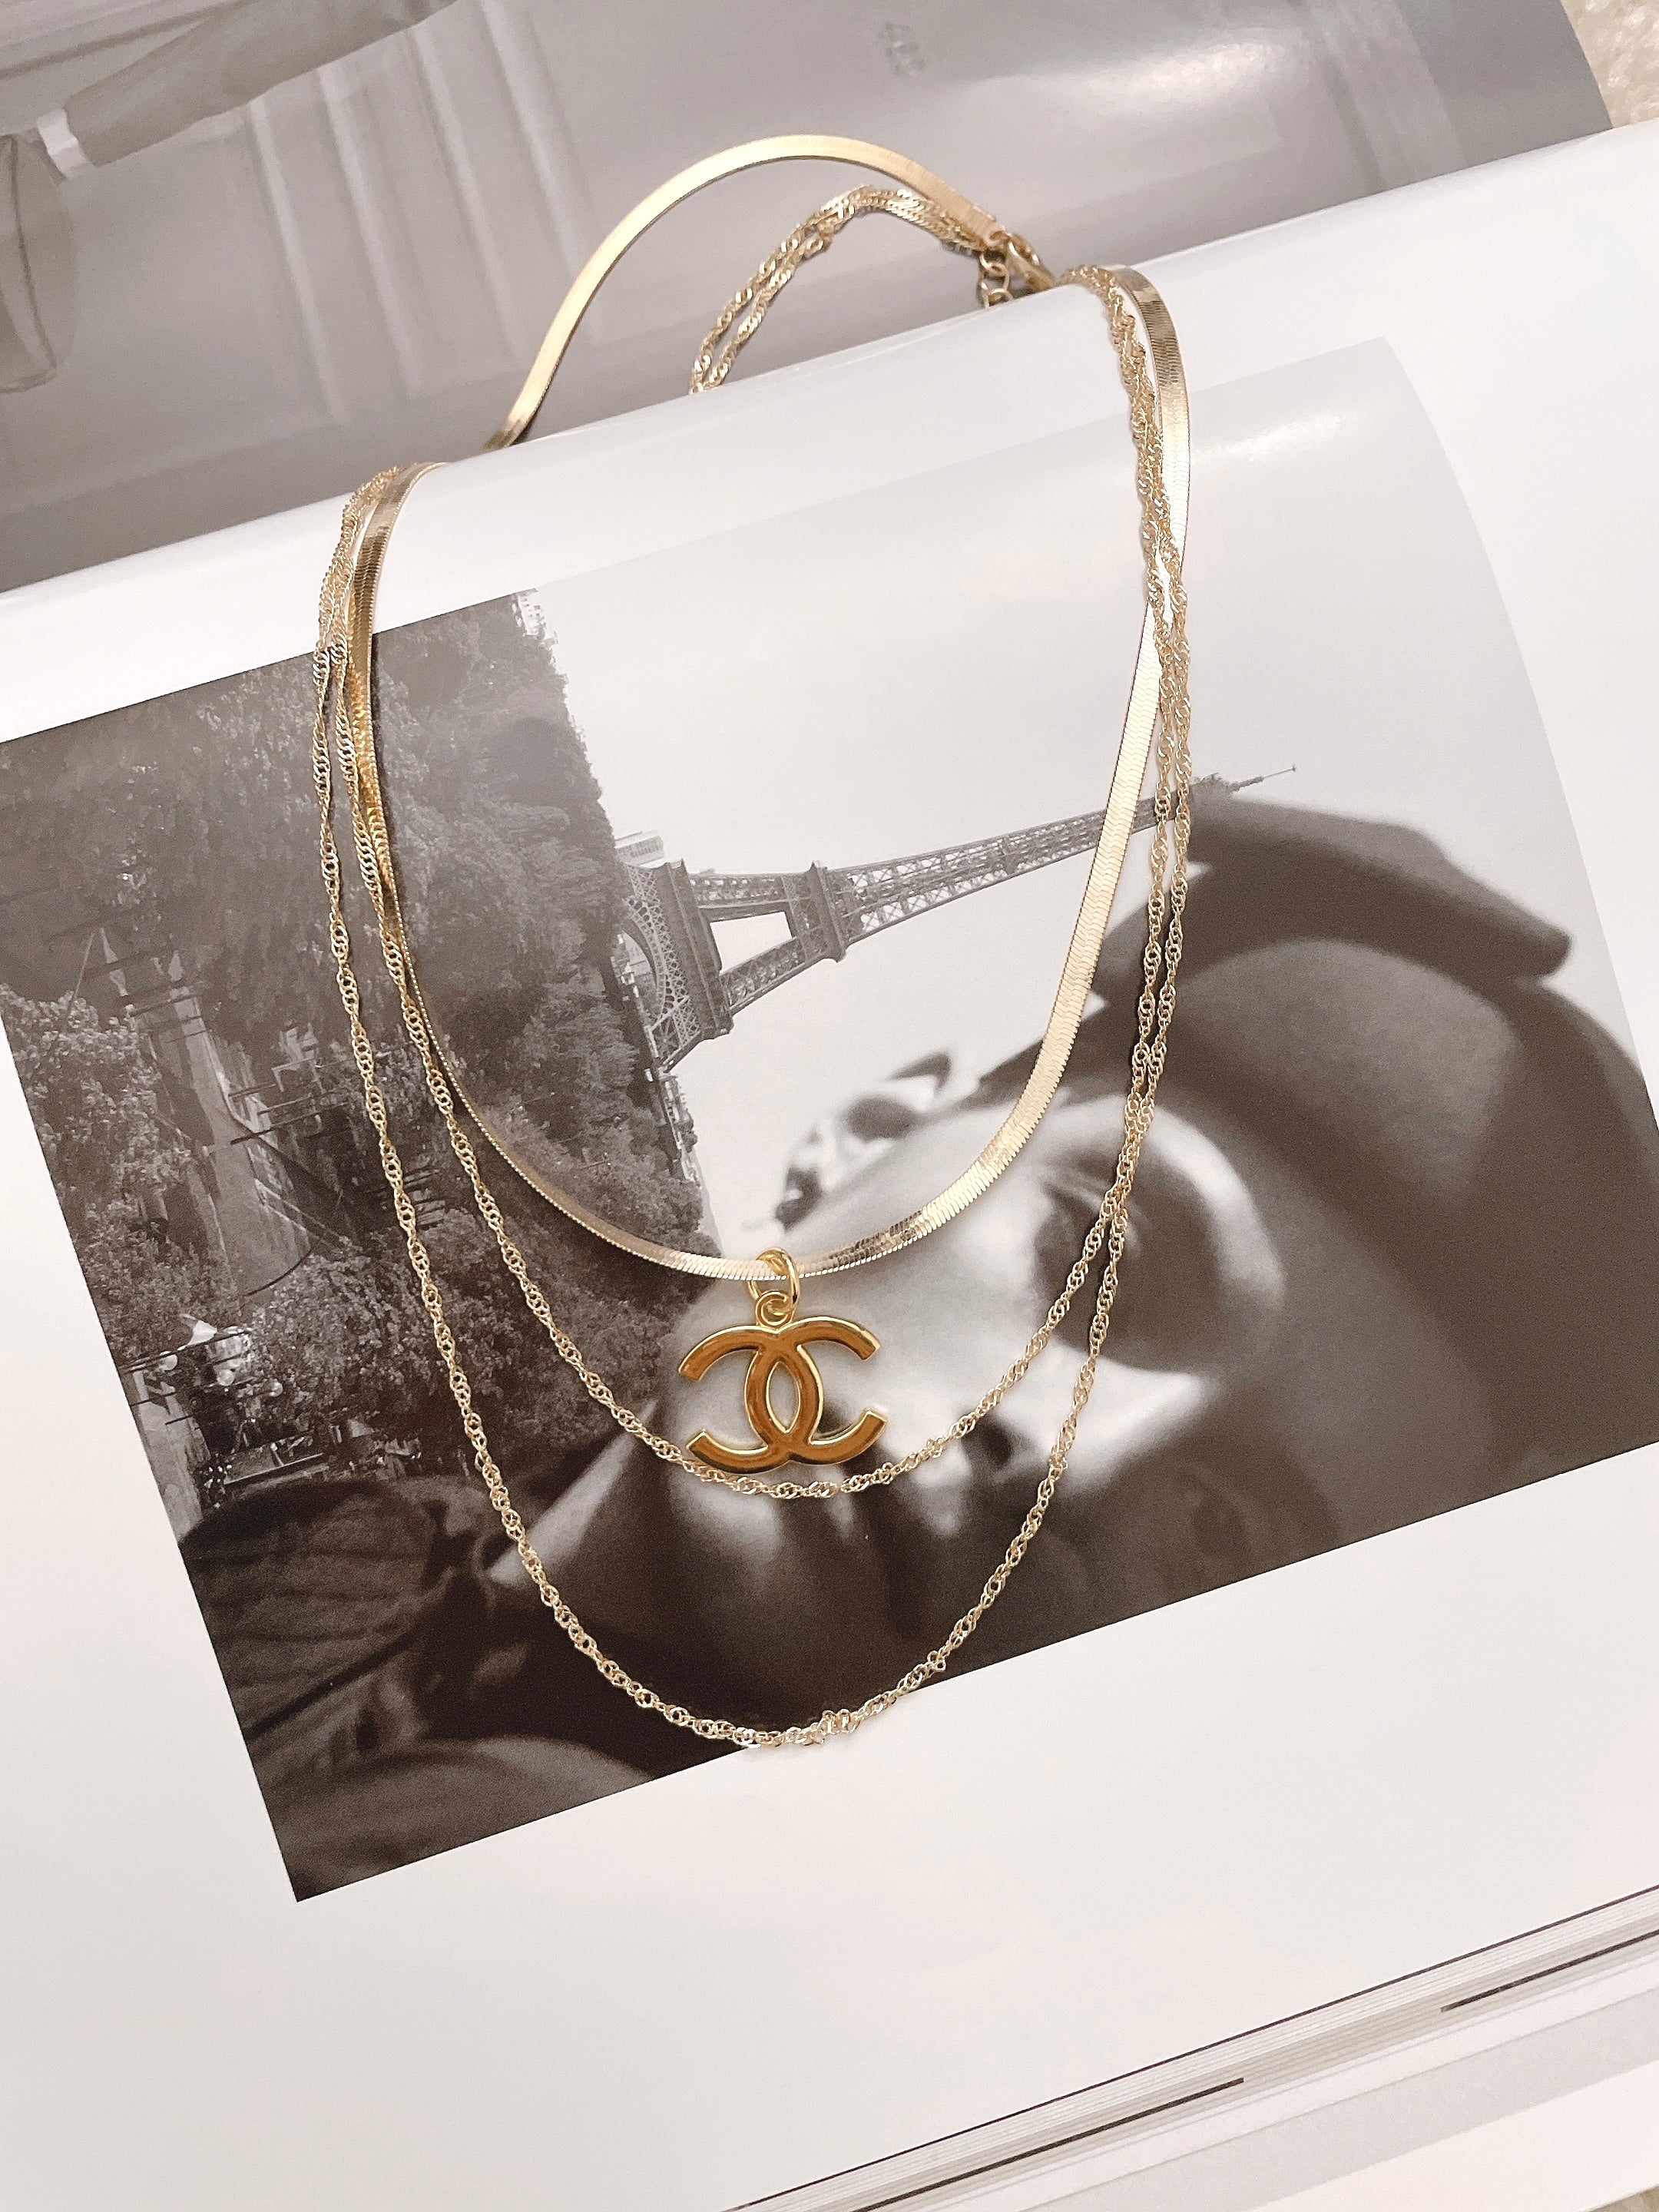 Repurposed Chanel classic Necklace - Dreamized